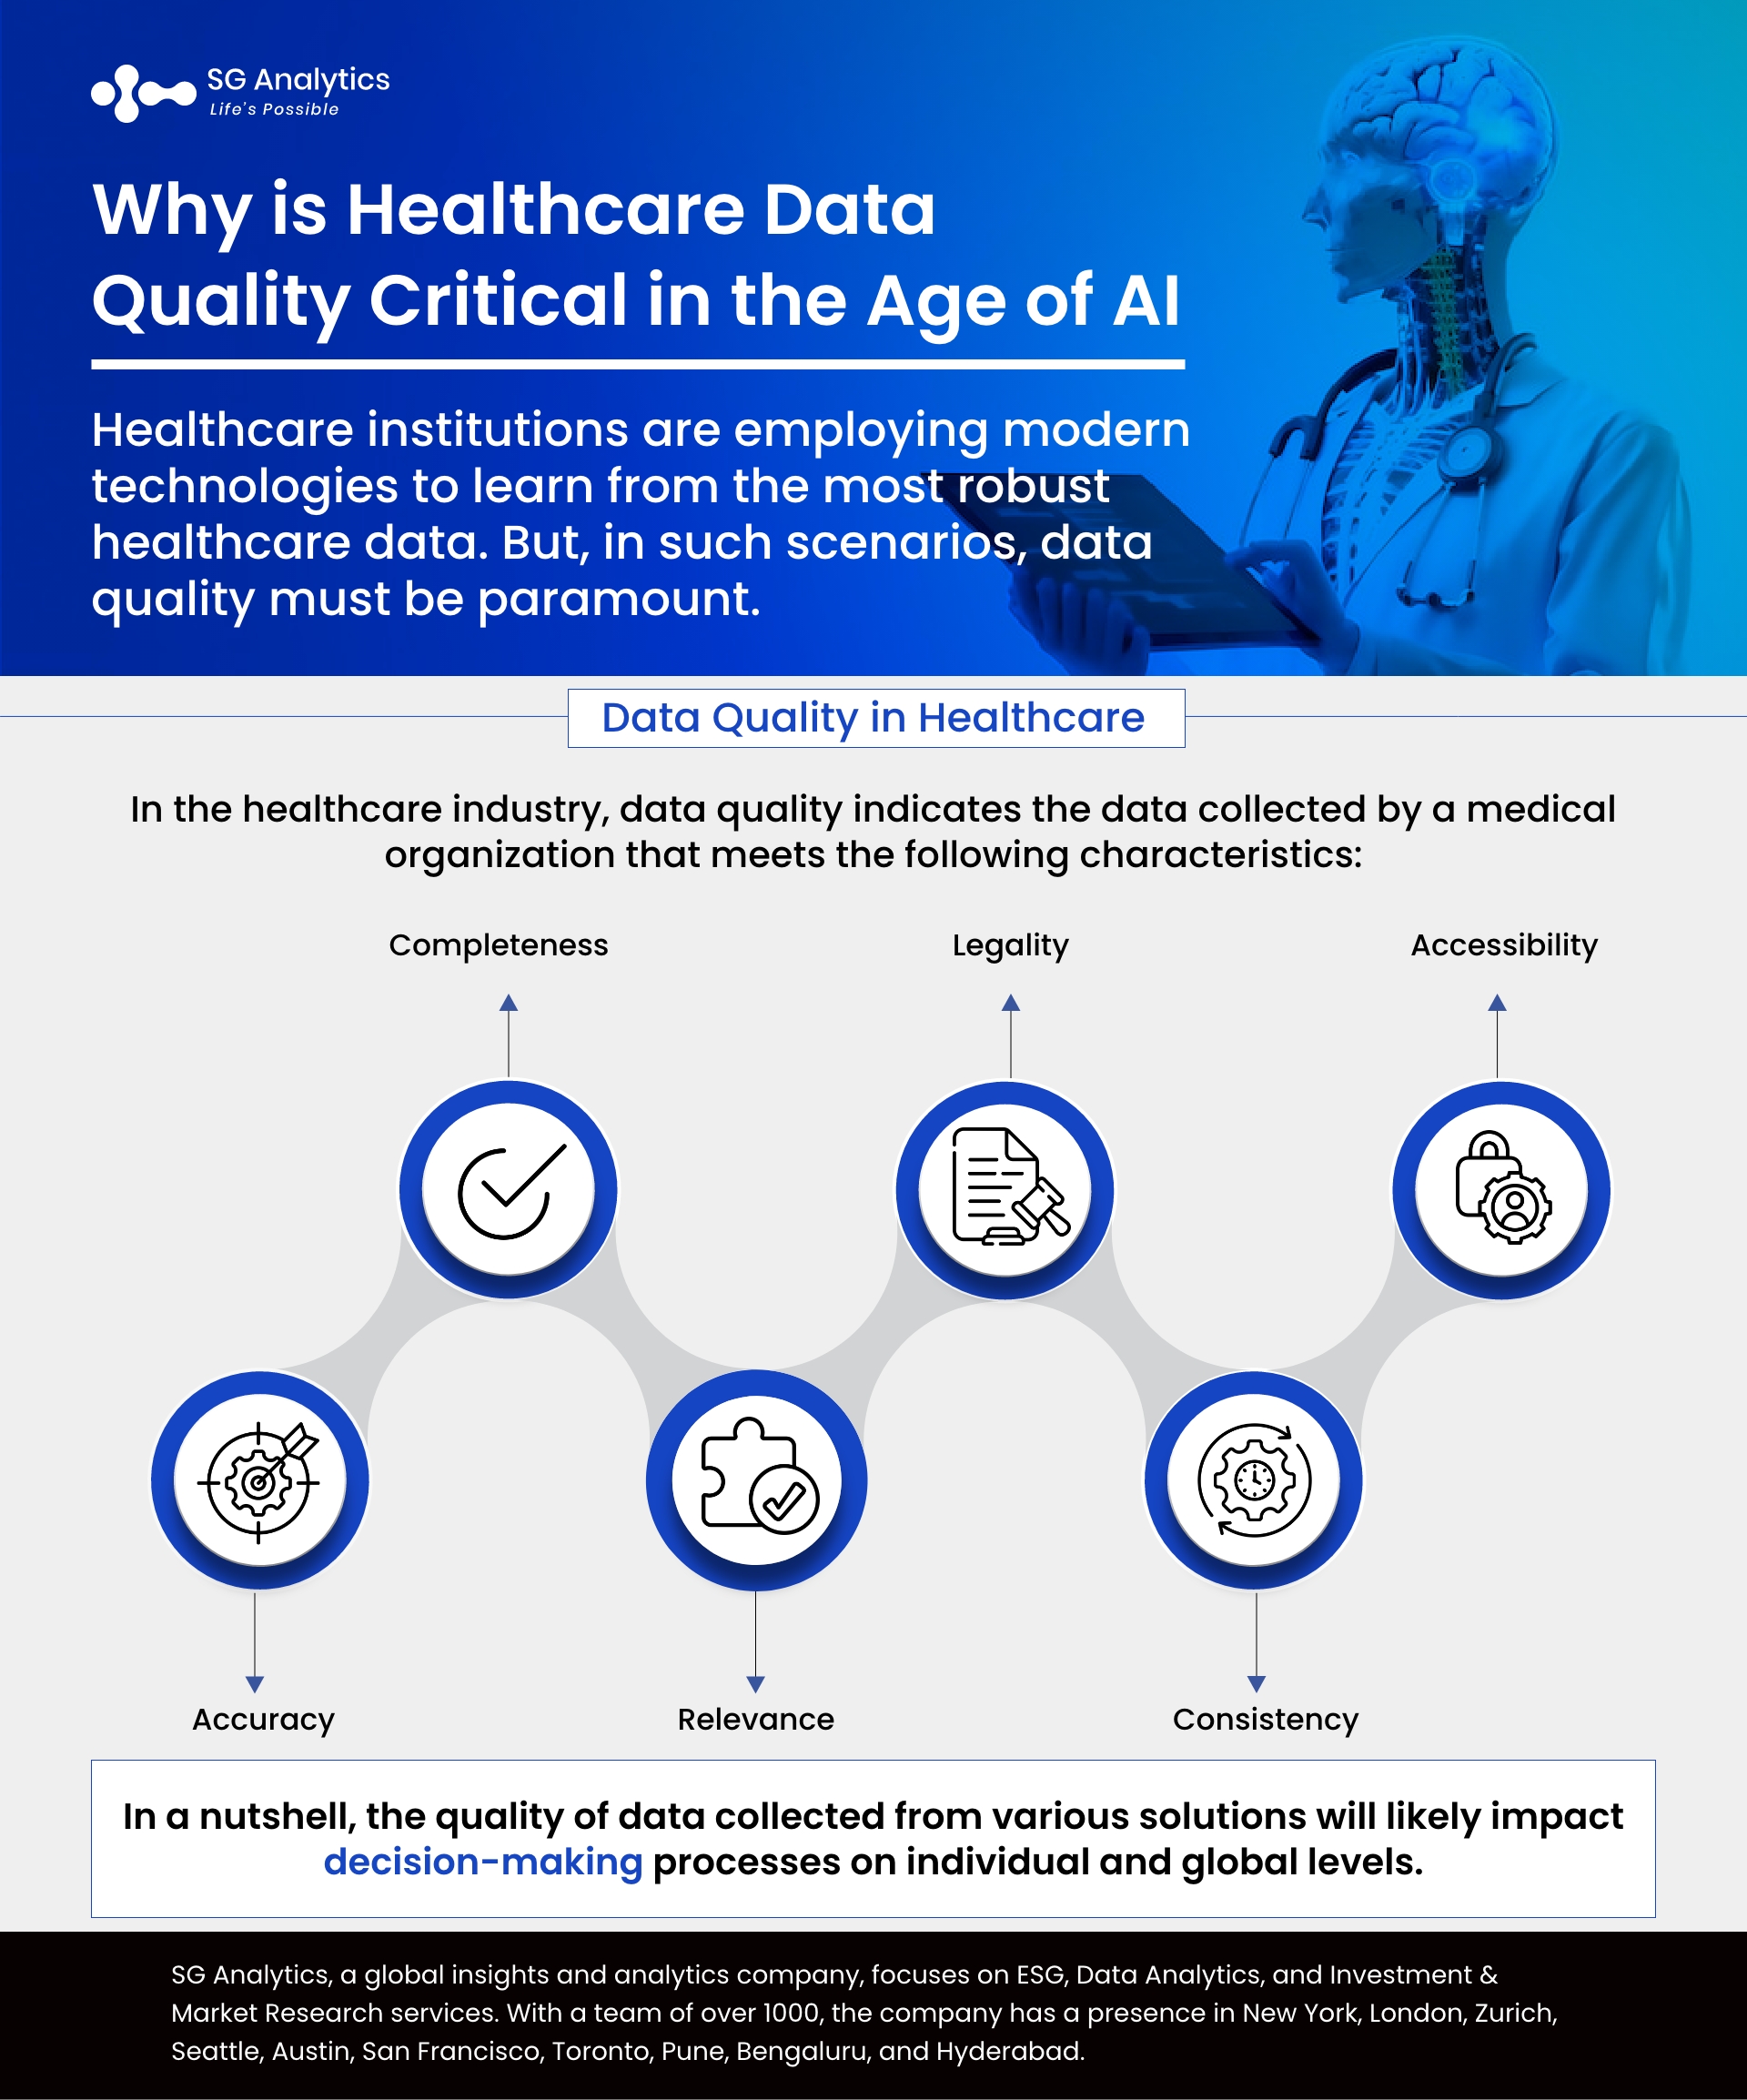 Why is Healthcare Data Quality Critical in the Age of AI